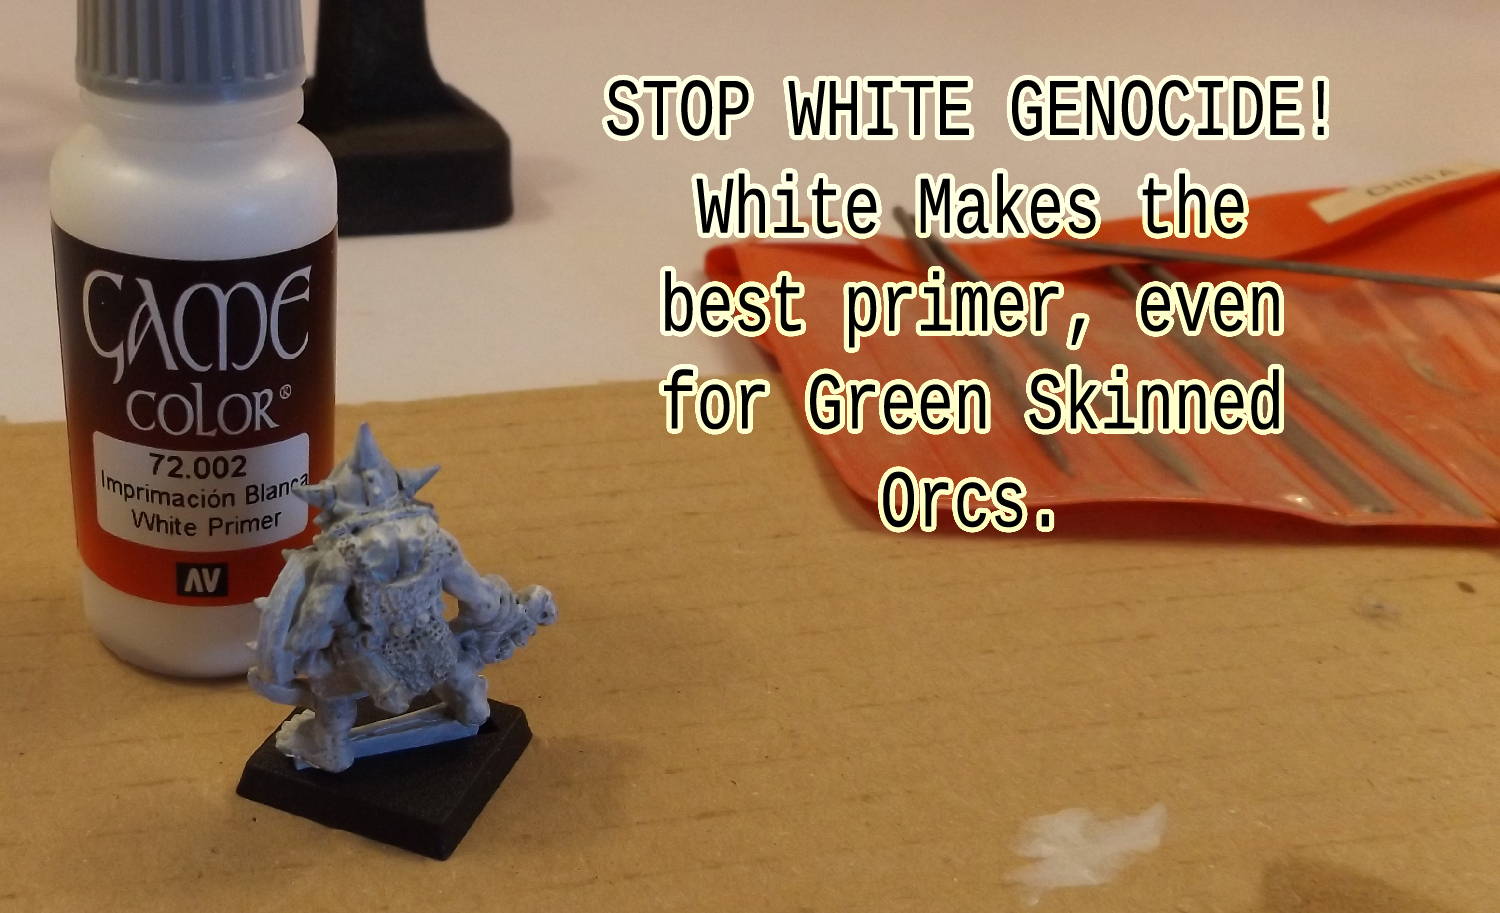 STOP WHITE GENOCIDE! White makes the best primer.